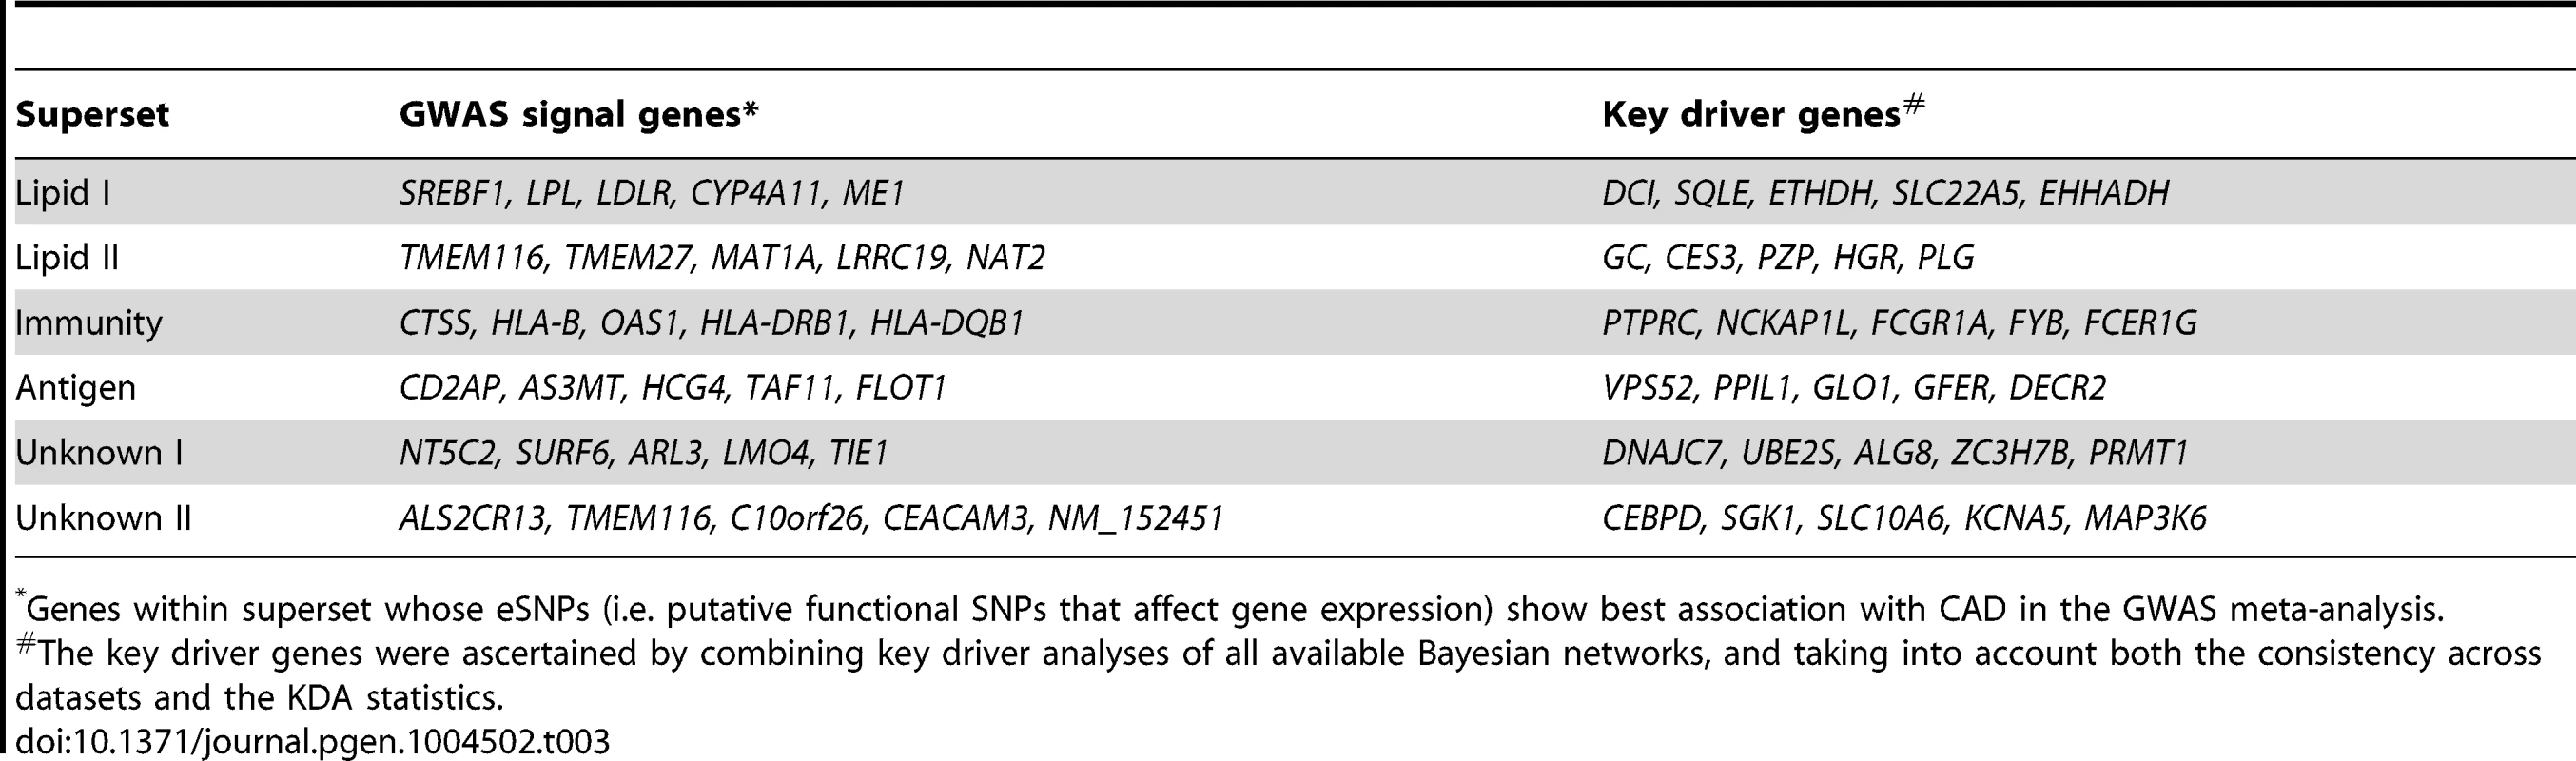 Top five genes whose eSNPs show strongest association with CAD in GWAS (termed “GWAS signal genes”) and key driver genes for selected CAD-associated supersets.